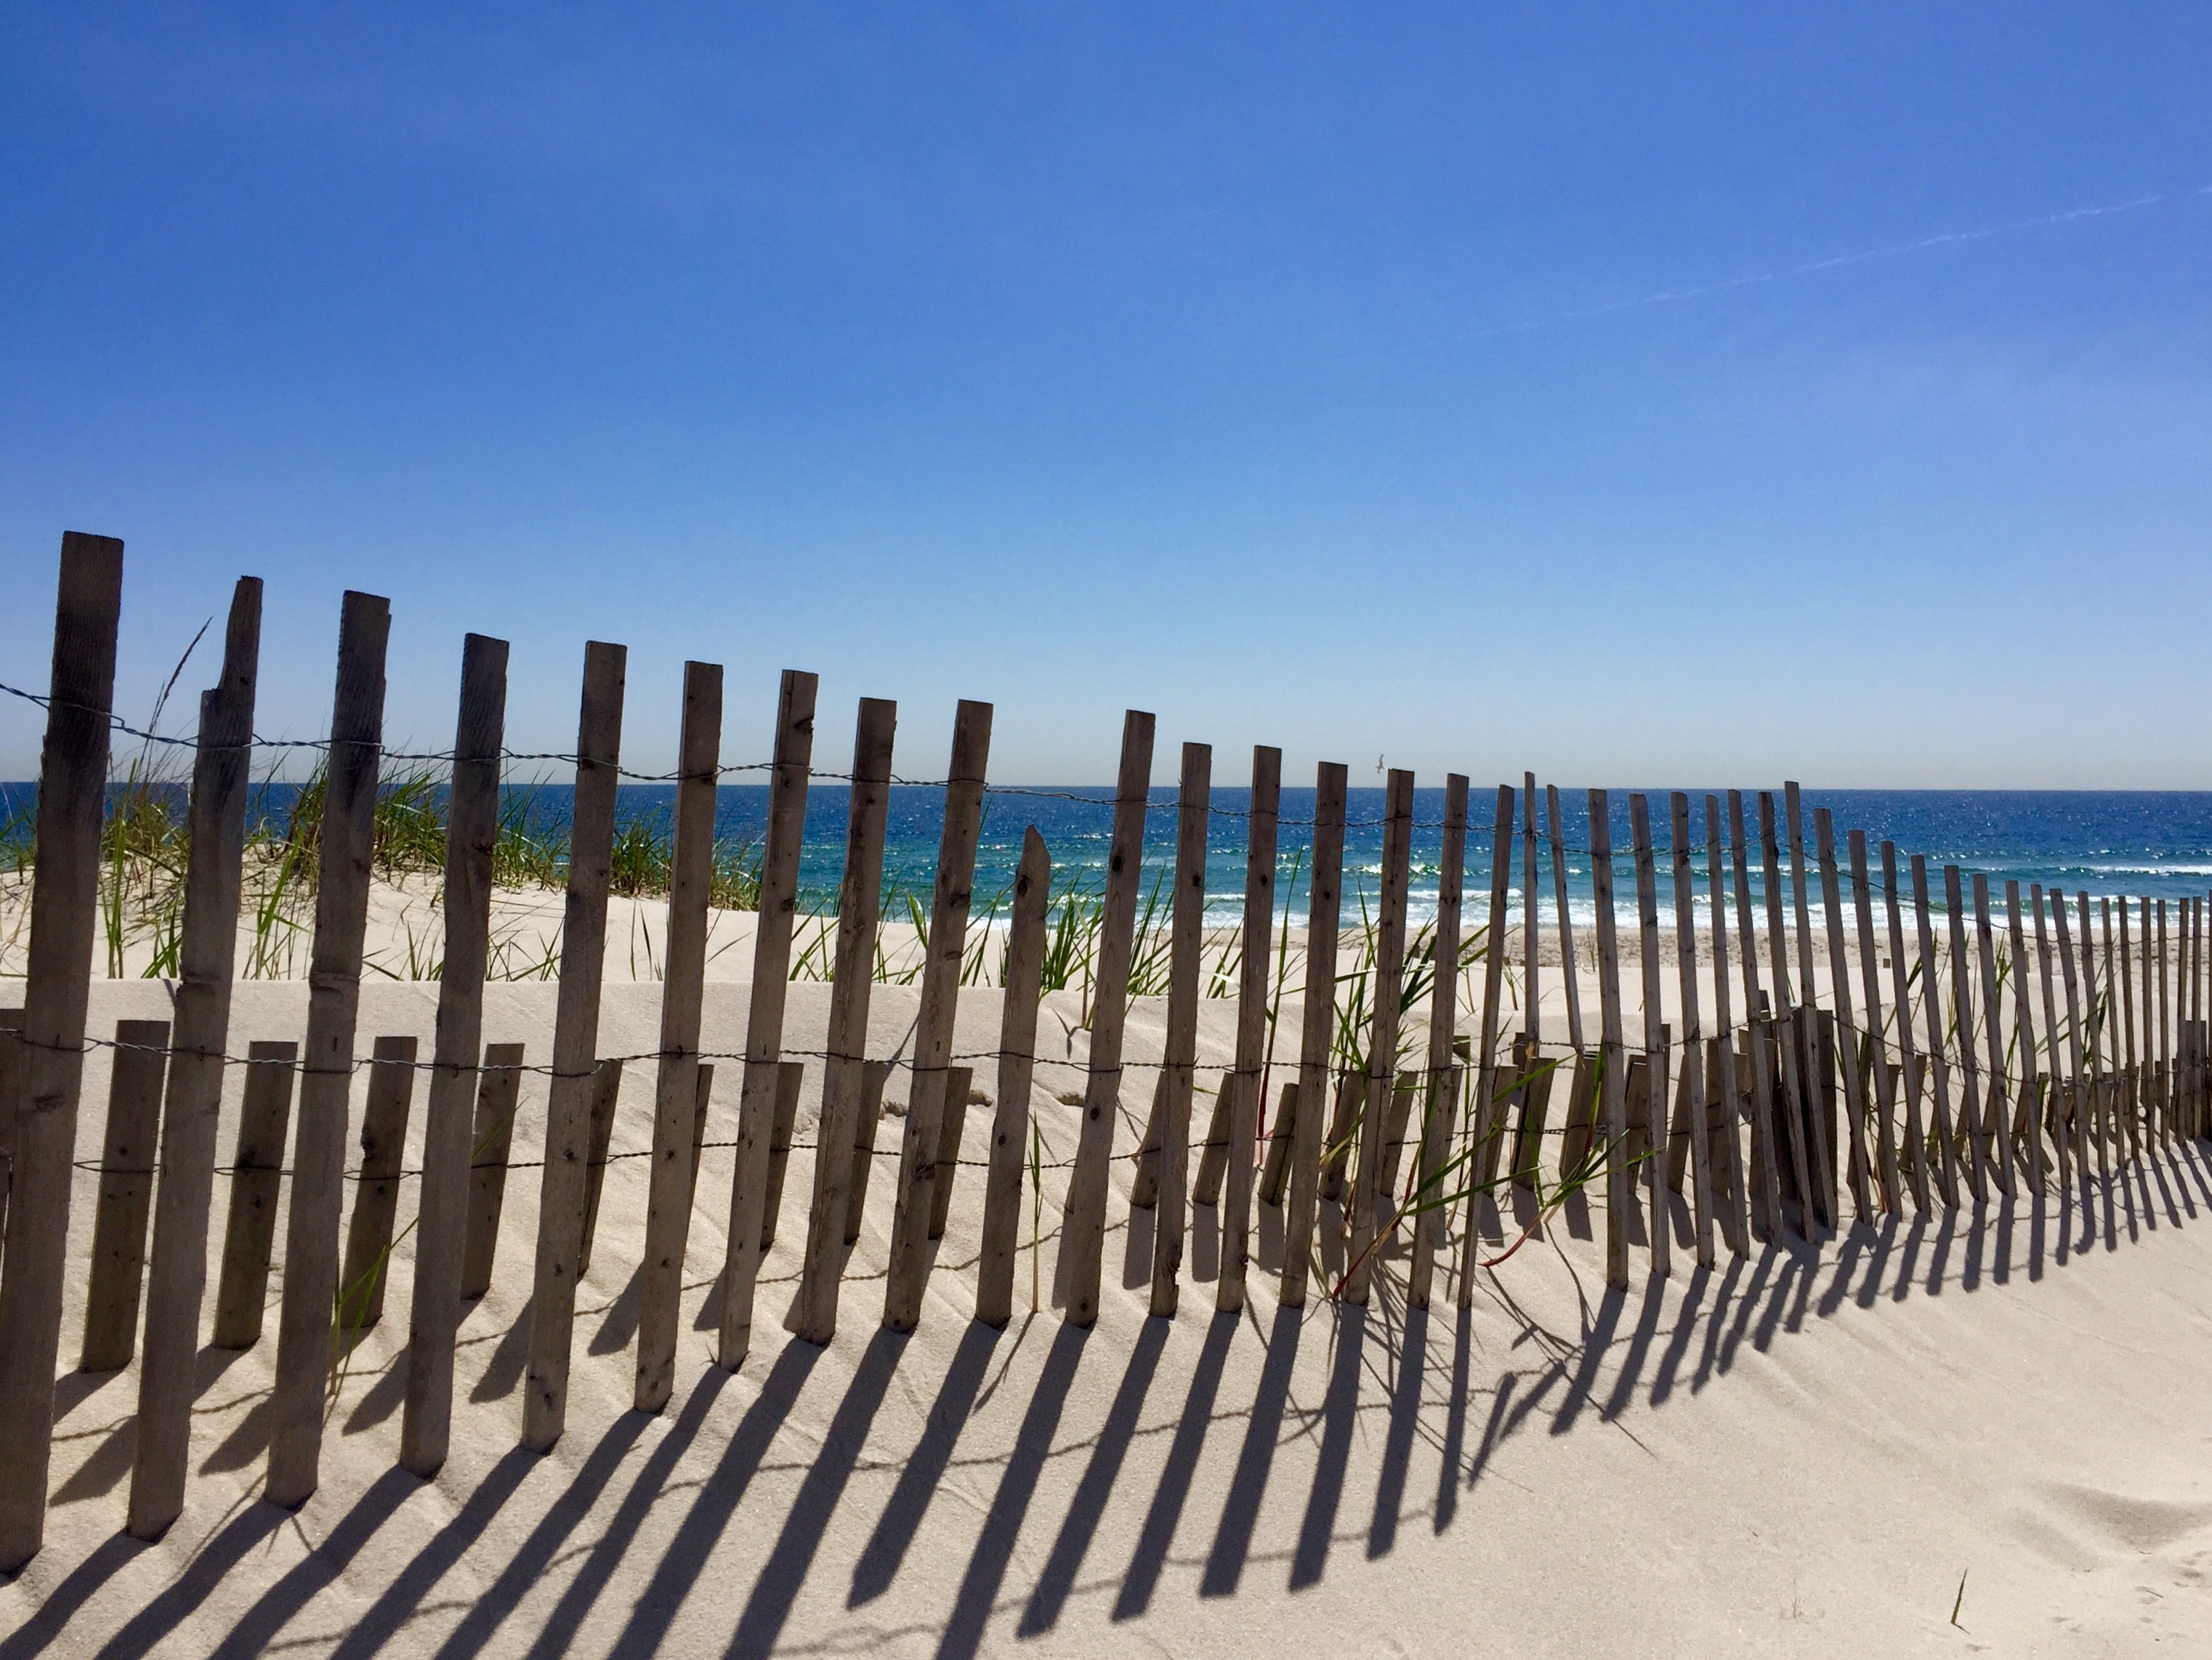  South Seaside Park in May 2015. (Photo: Justin Auciello/for NewsWorks) 